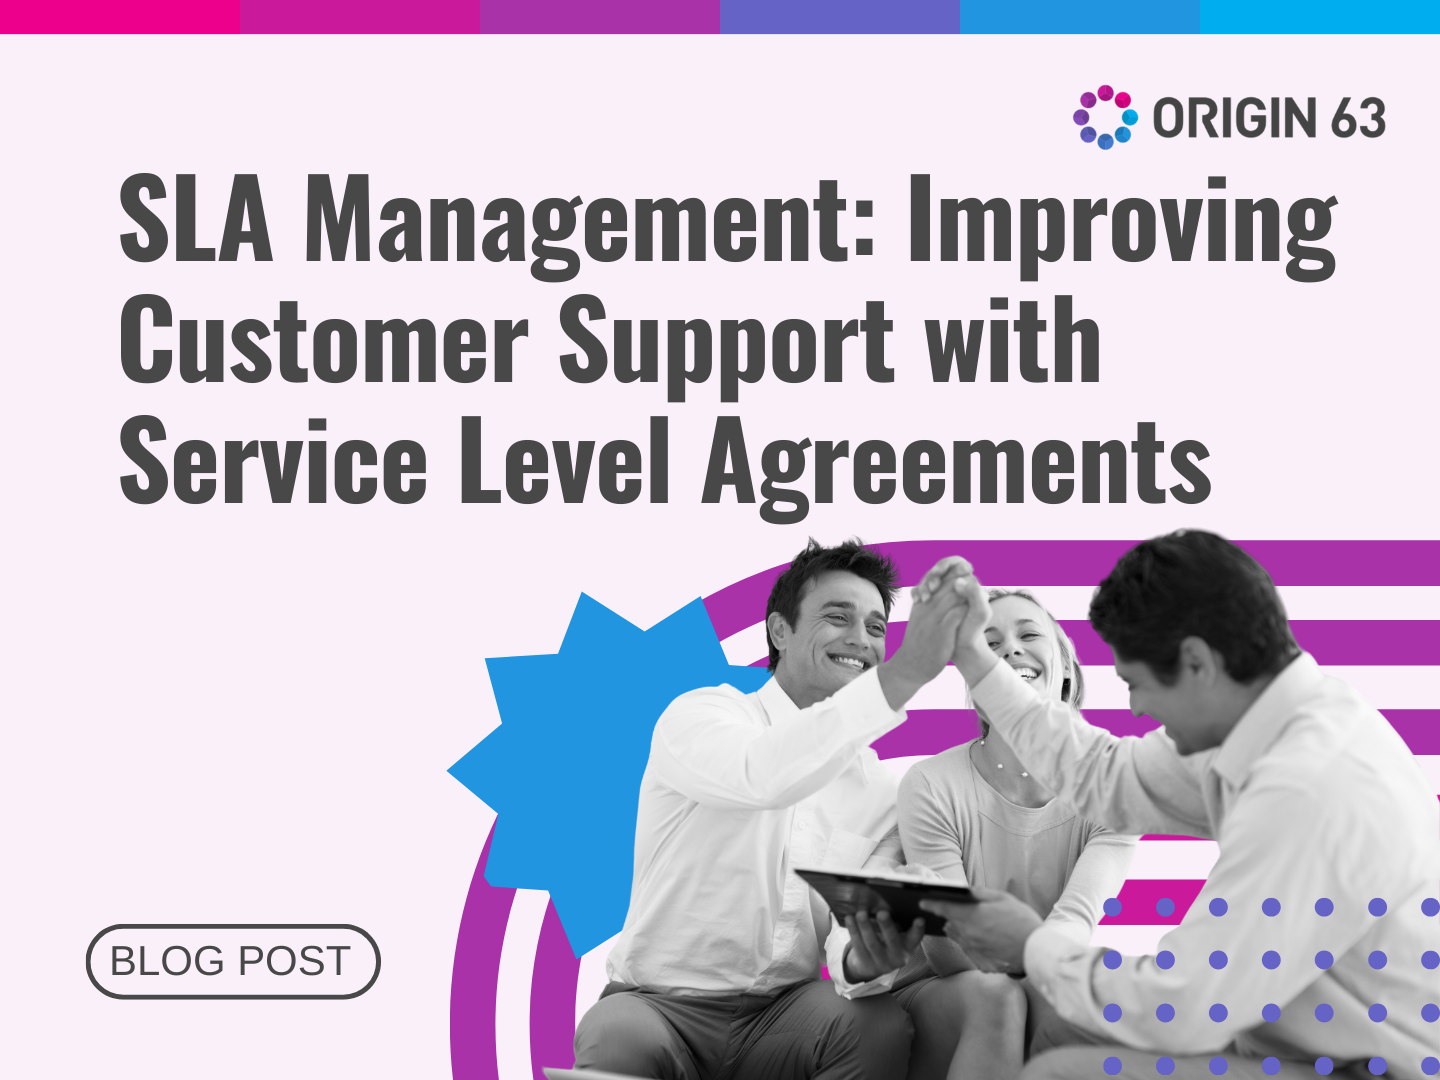 Optimize customer support with SLA management, improving response times and satisfaction and enhance service quality and streamline support processes.